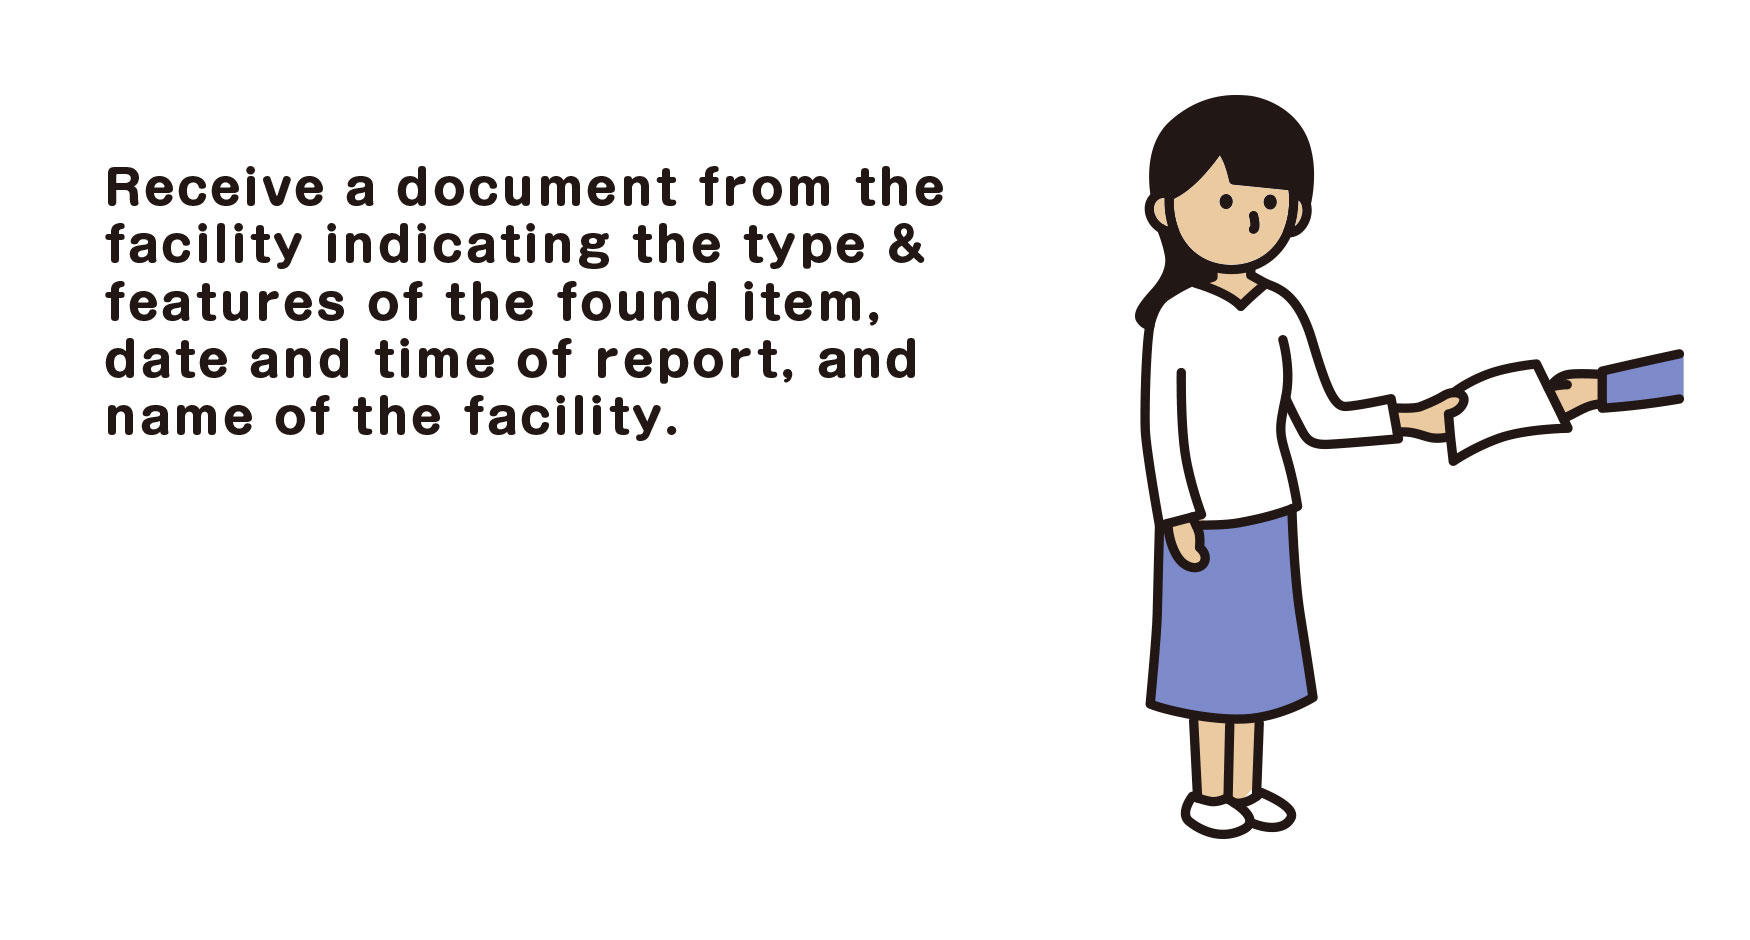 Receive a document from the facility indicating the type & features of the found item, date and time of report, and name of the facility.